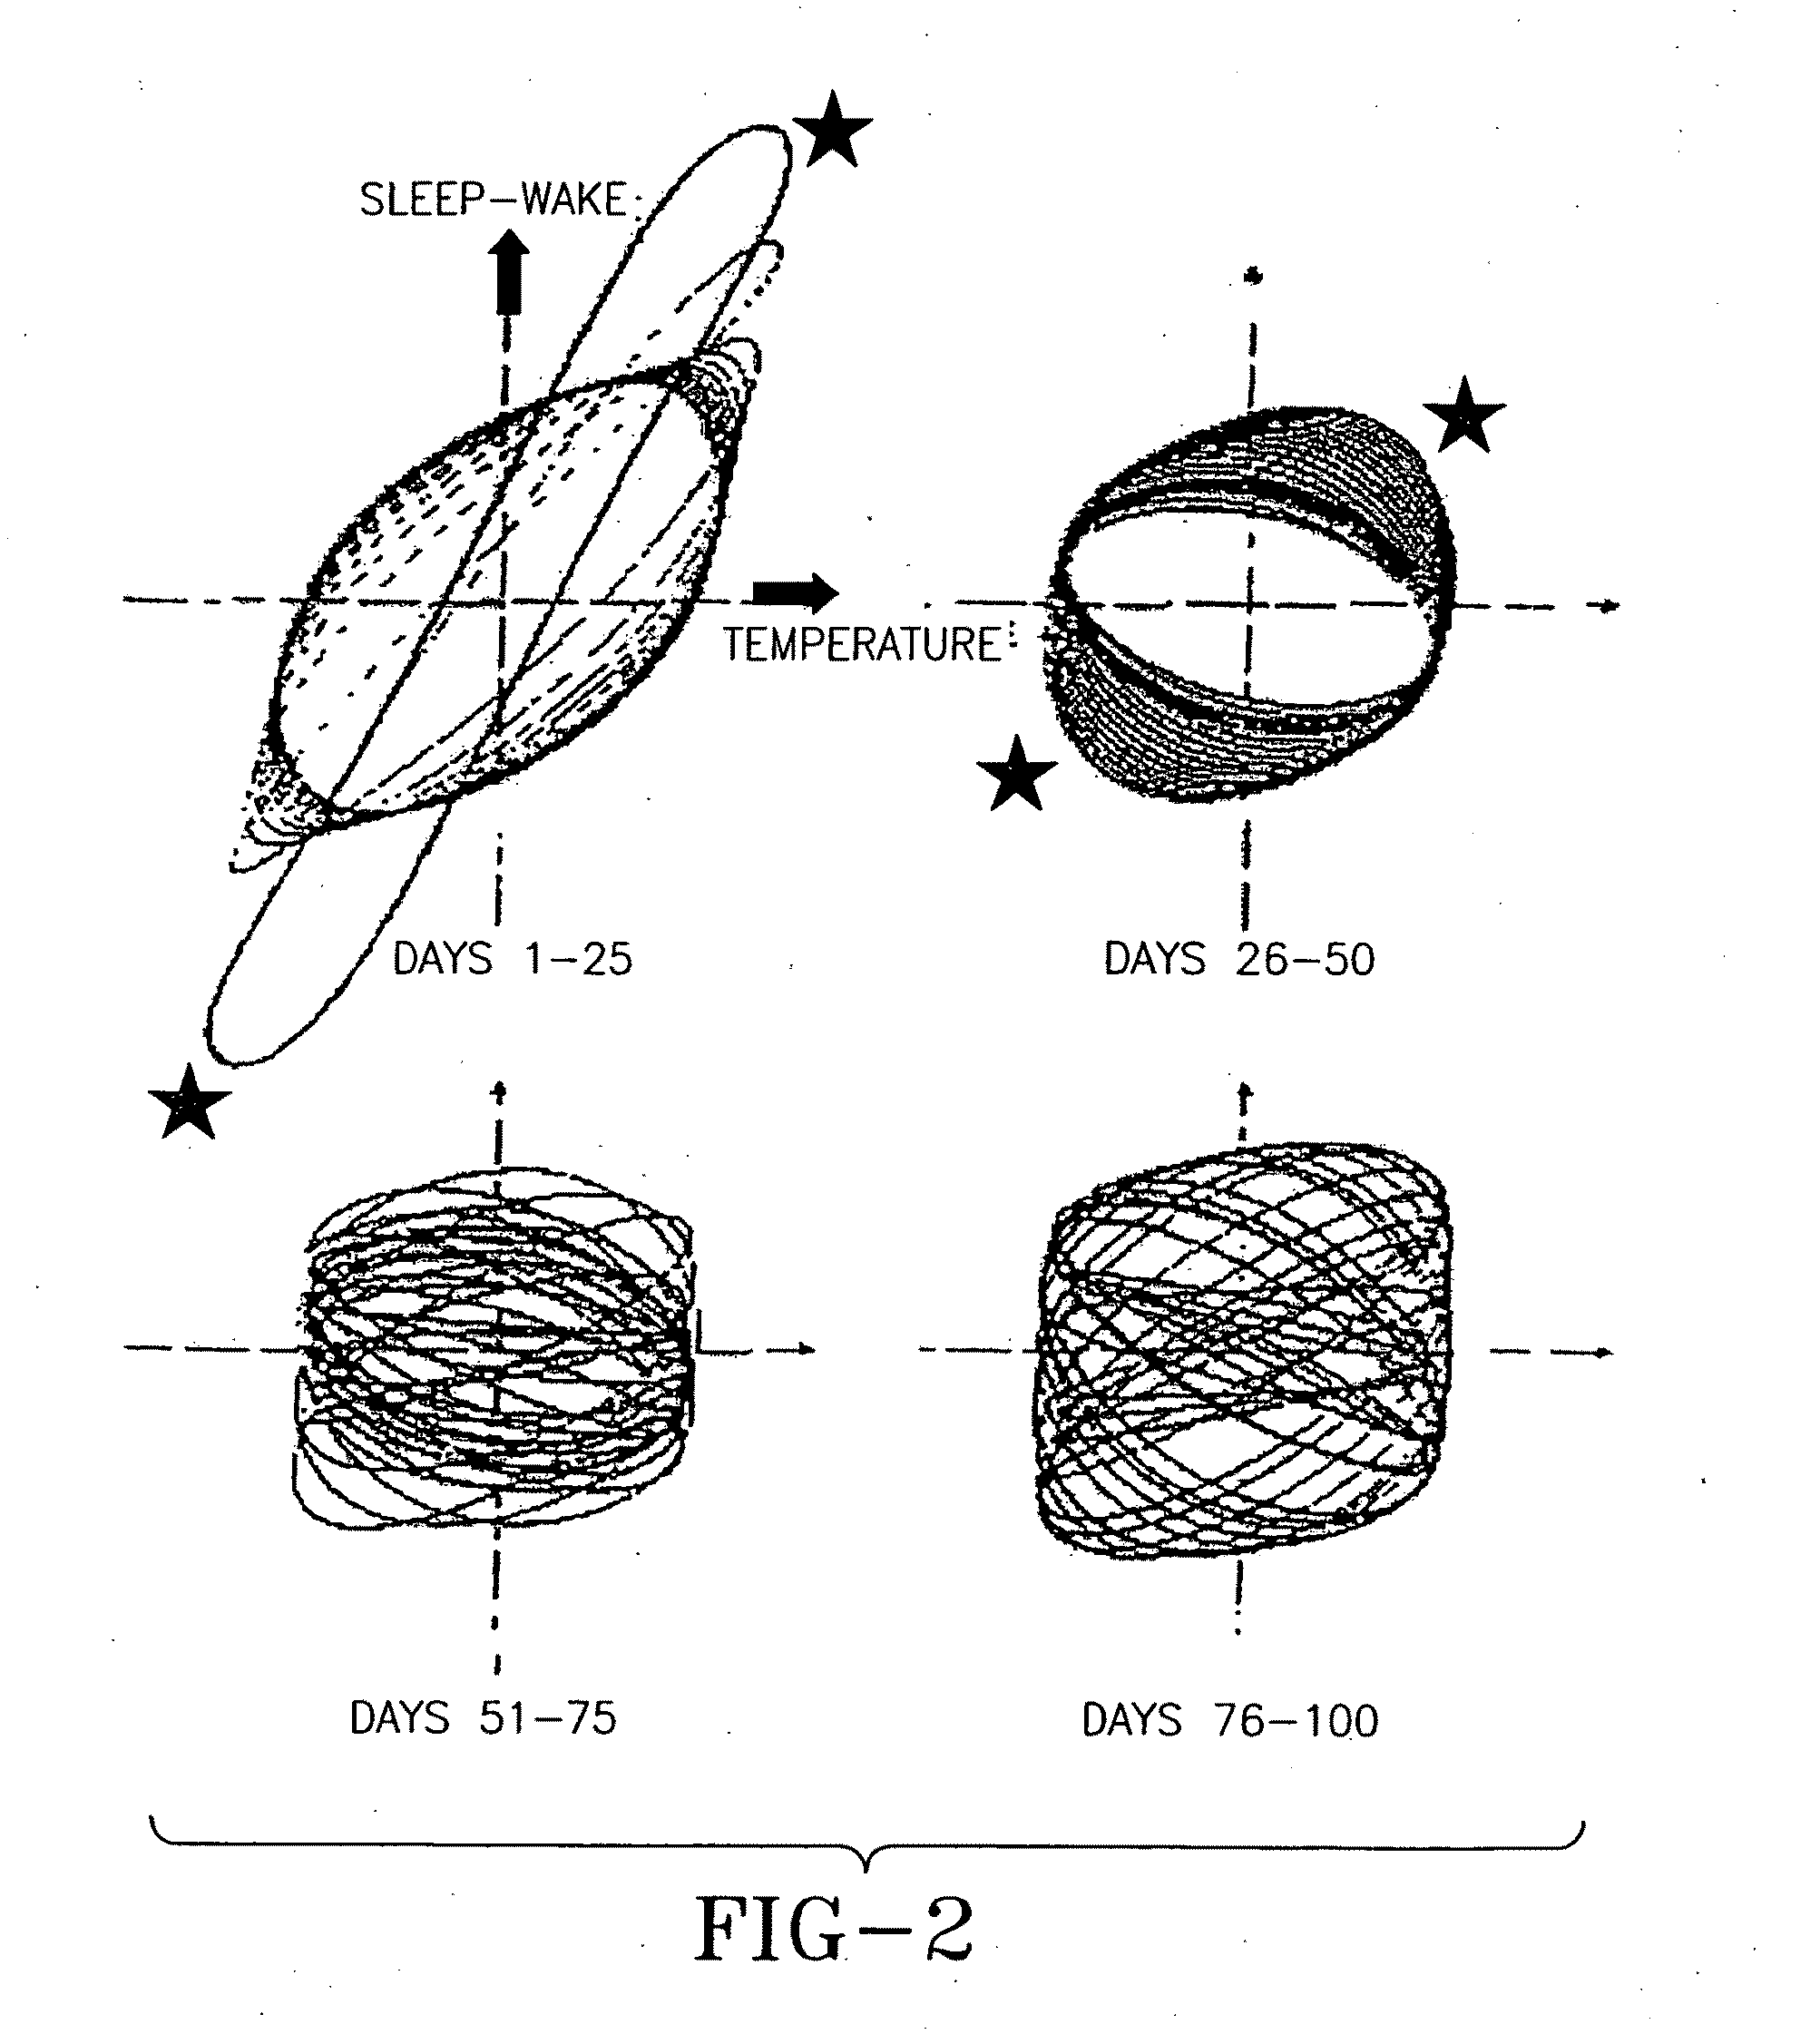 Method and Apparatus for Analysis of Psychiatric and Physical Conditions